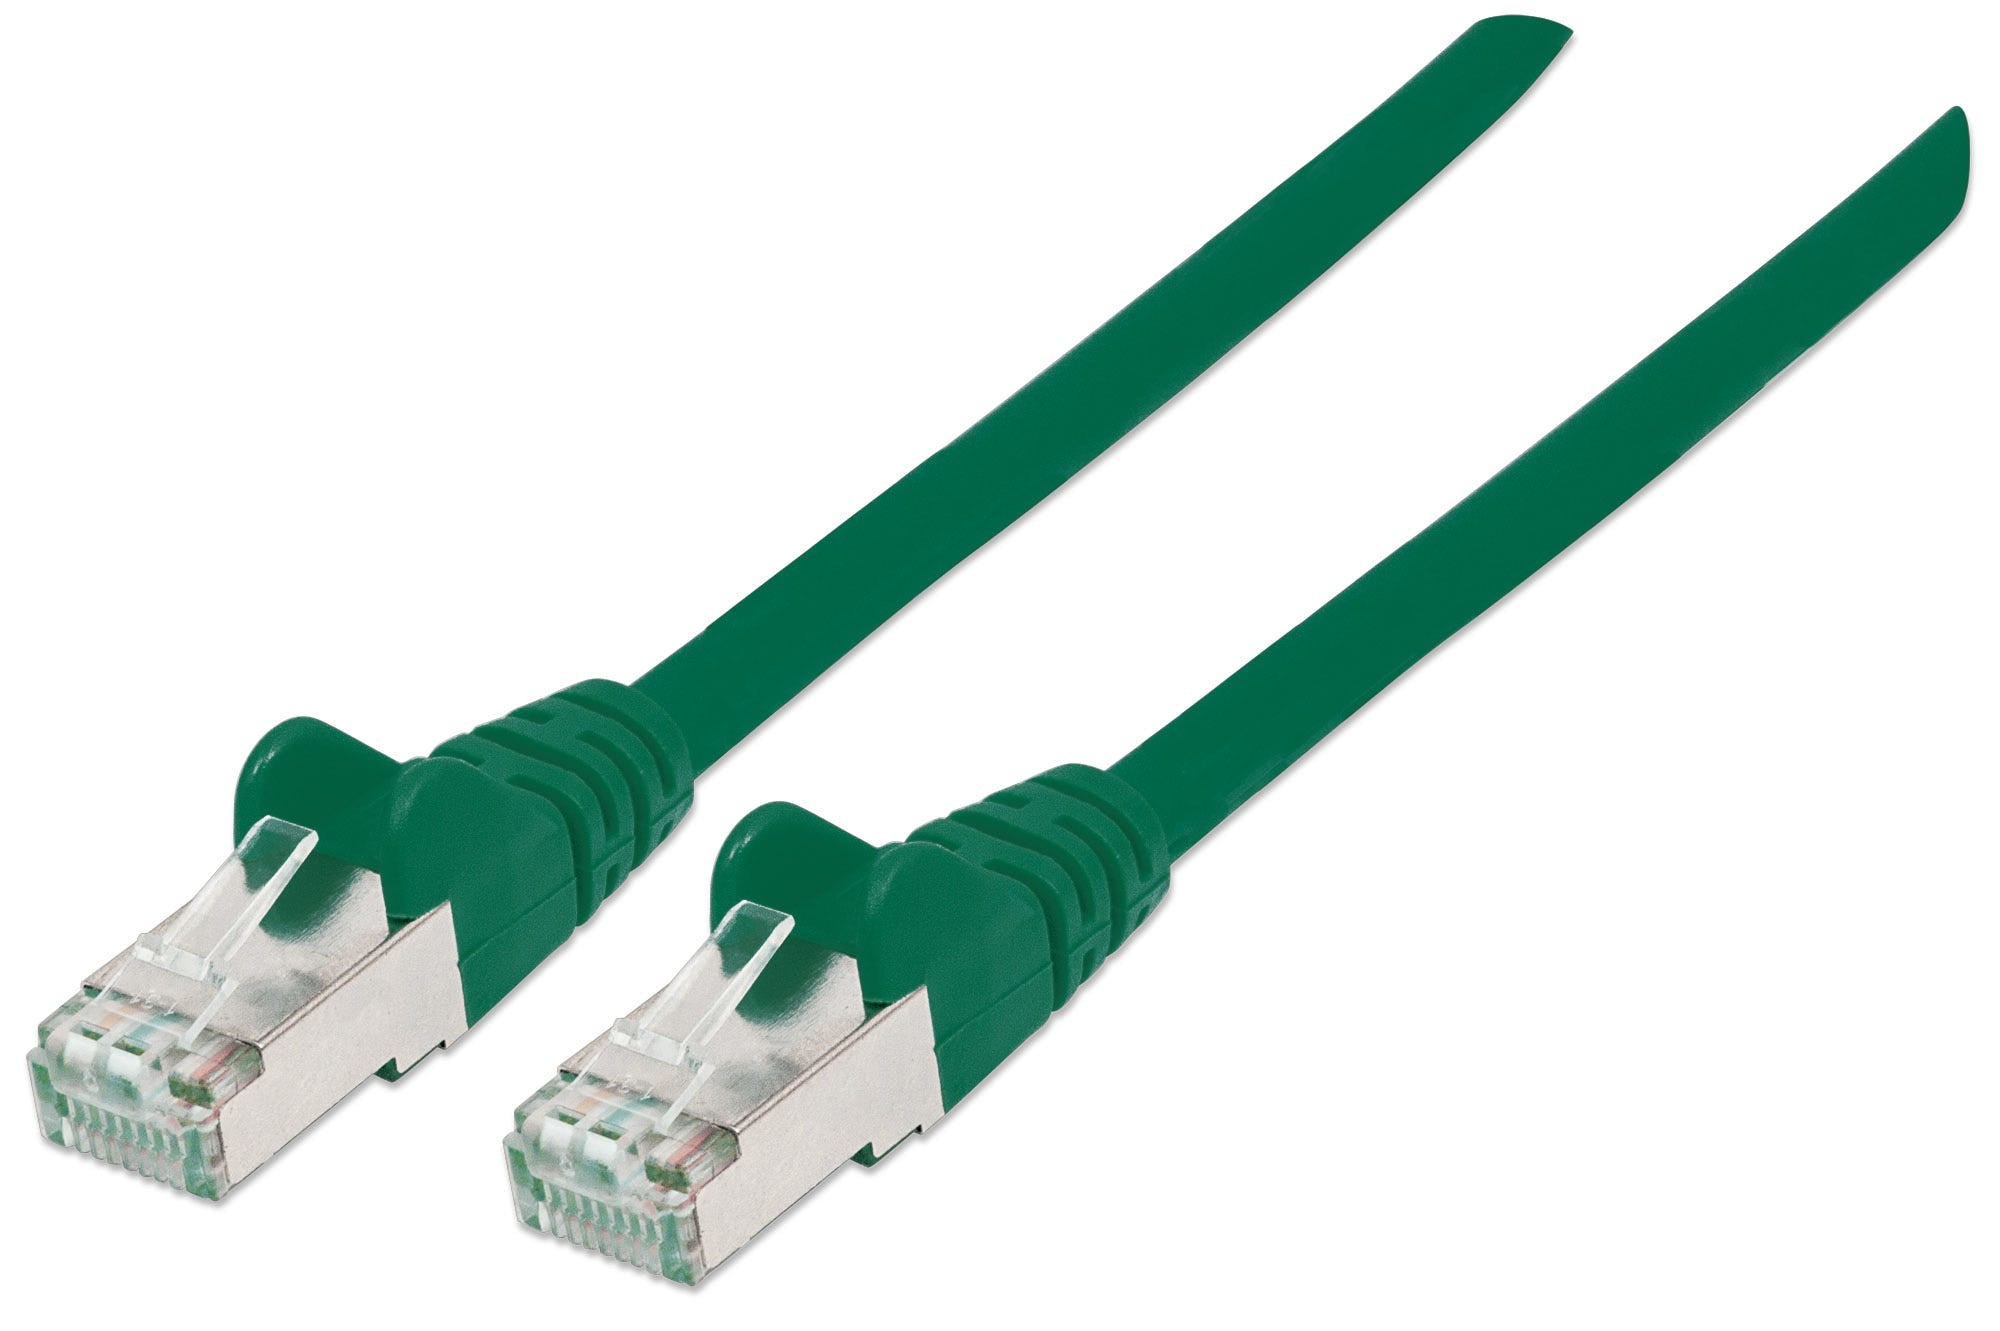 Intellinet Network Patch Cable, Cat6, 5m, Green, Copper, S/FTP, LSOH / LSZH, PVC, RJ45, Gold Plated Contacts, Snagless, Booted, Lifetime Warranty, Polybag